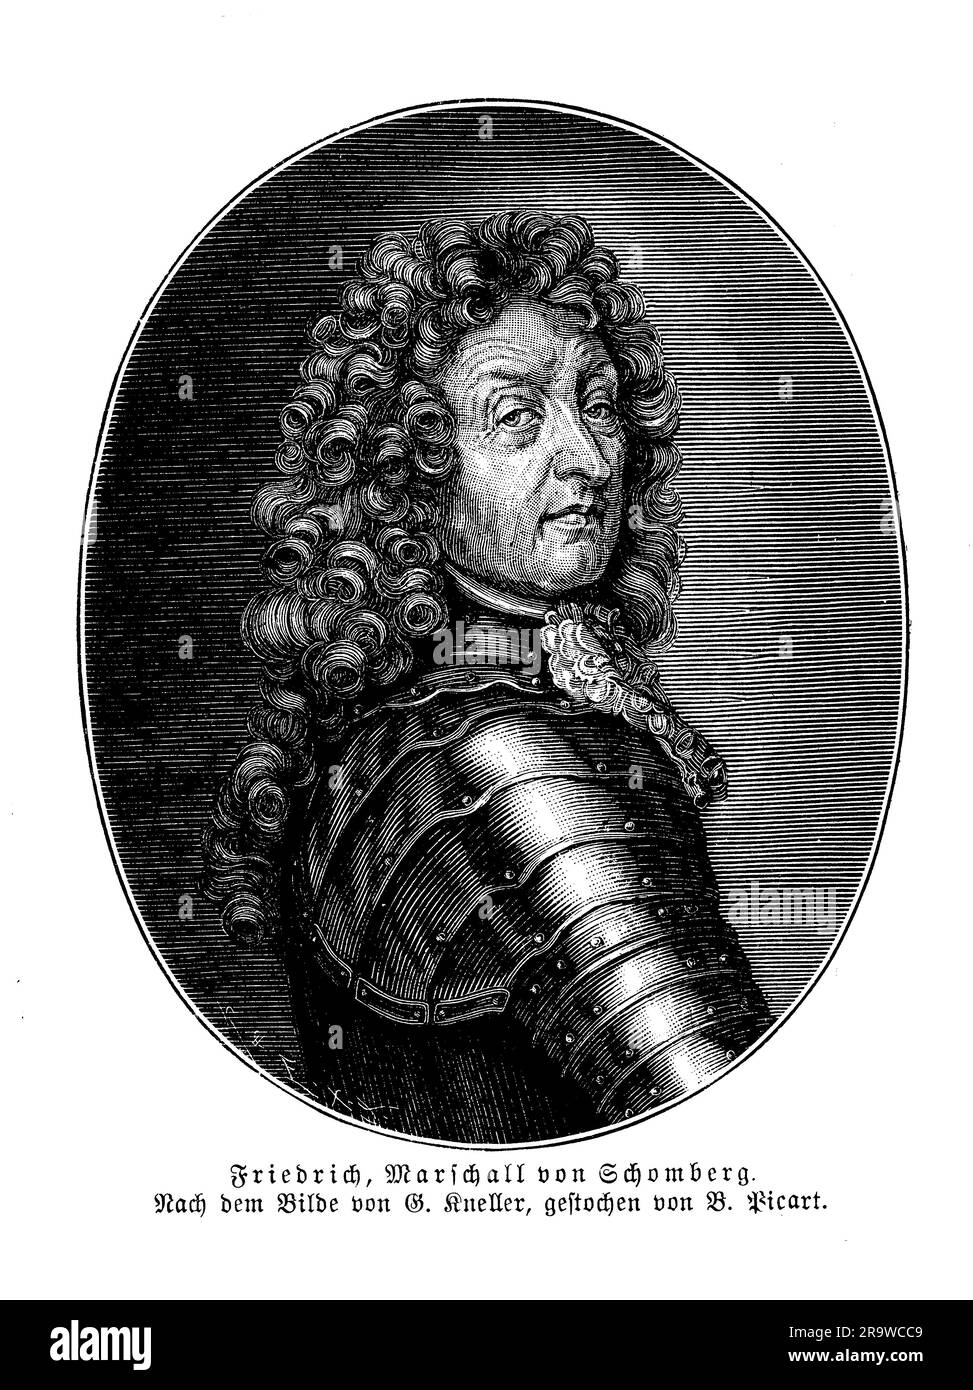 Friedrich von Schomberg, also known as Frédéric Armand de Schomberg, was a German-born soldier and statesman who served in the armies of several European countries during the seventeenth century. He began his military career in the service of the Dutch Republic, and later served as a general in the armies of France and Portugal. Schomberg is best known for his role in the Glorious Revolution of 1688, when he led an army of English, Dutch, and Huguenot soldiers against James II in support of William of Orange. He was subsequently appointed as commander-in-chief of William's army in Ireland Stock Photo